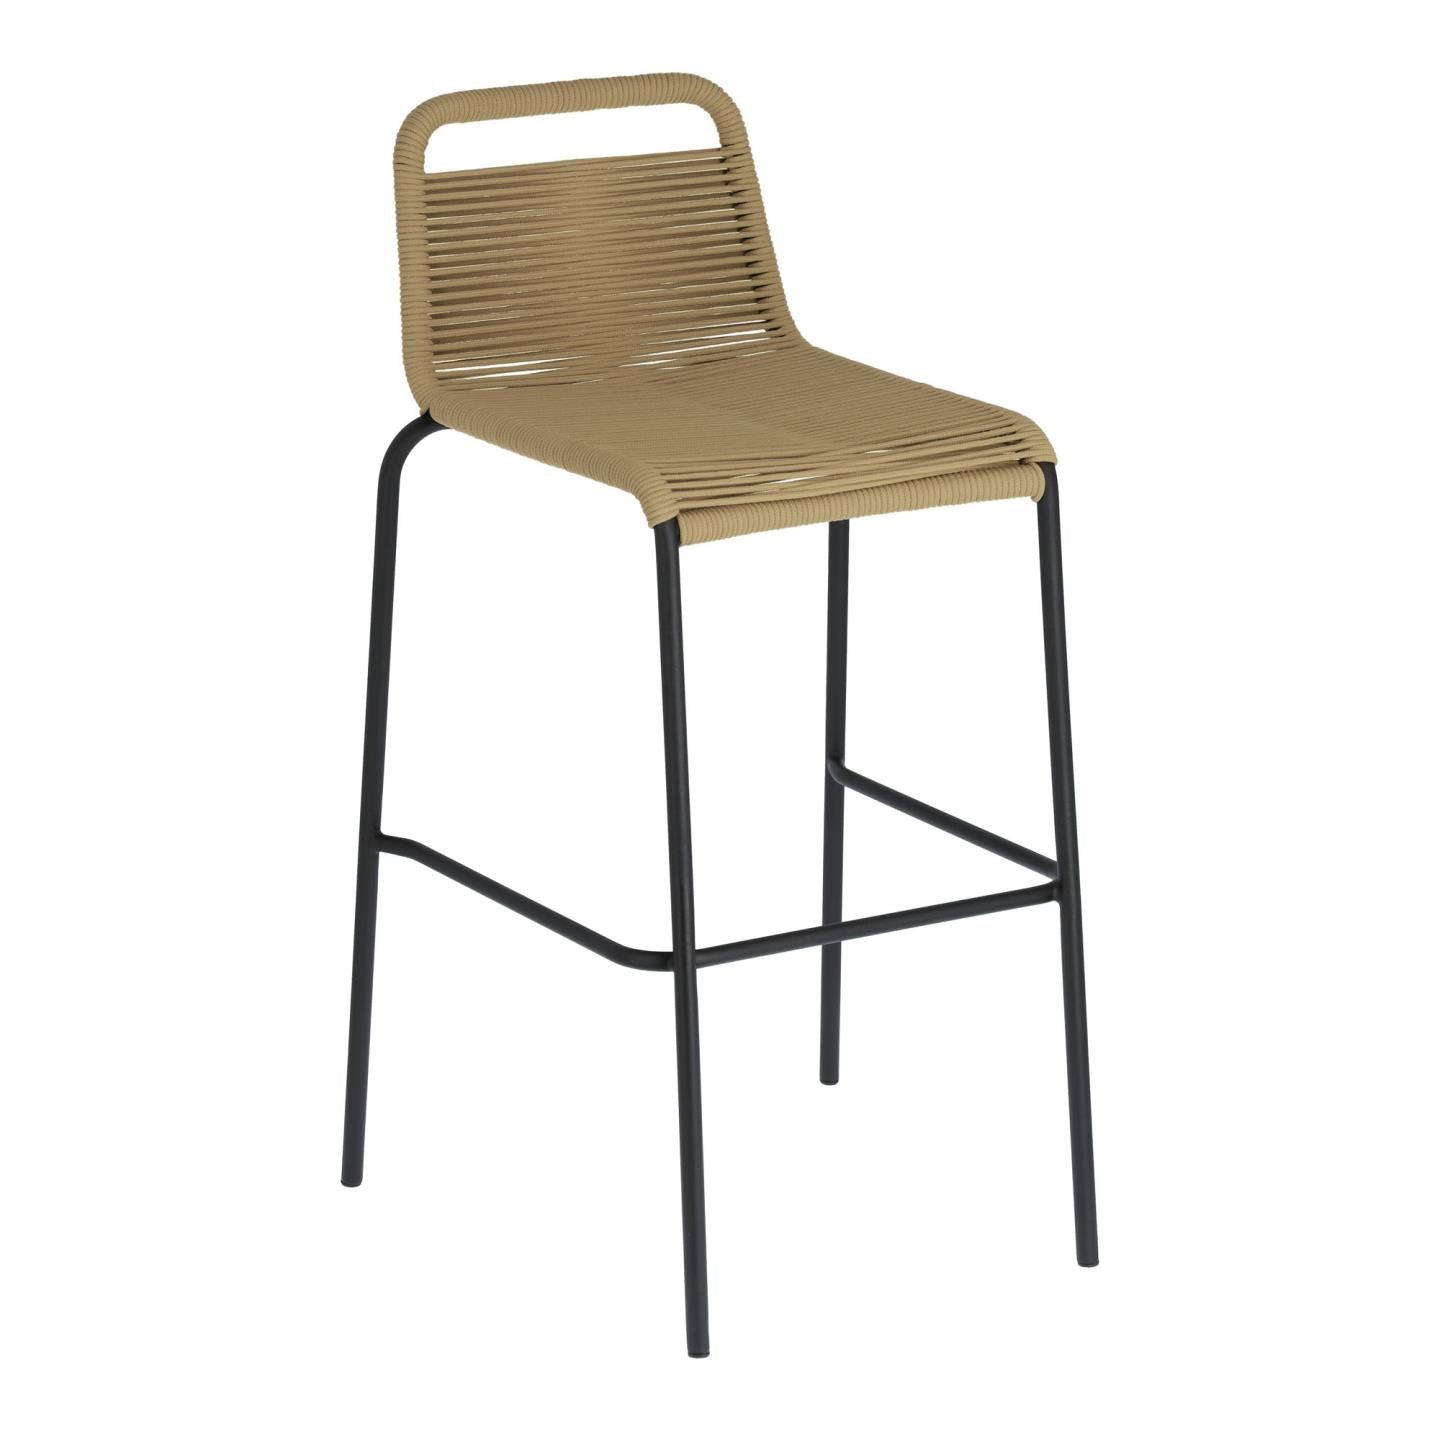 Lambton stackable stool in brown rope and black finish steel 74 cm